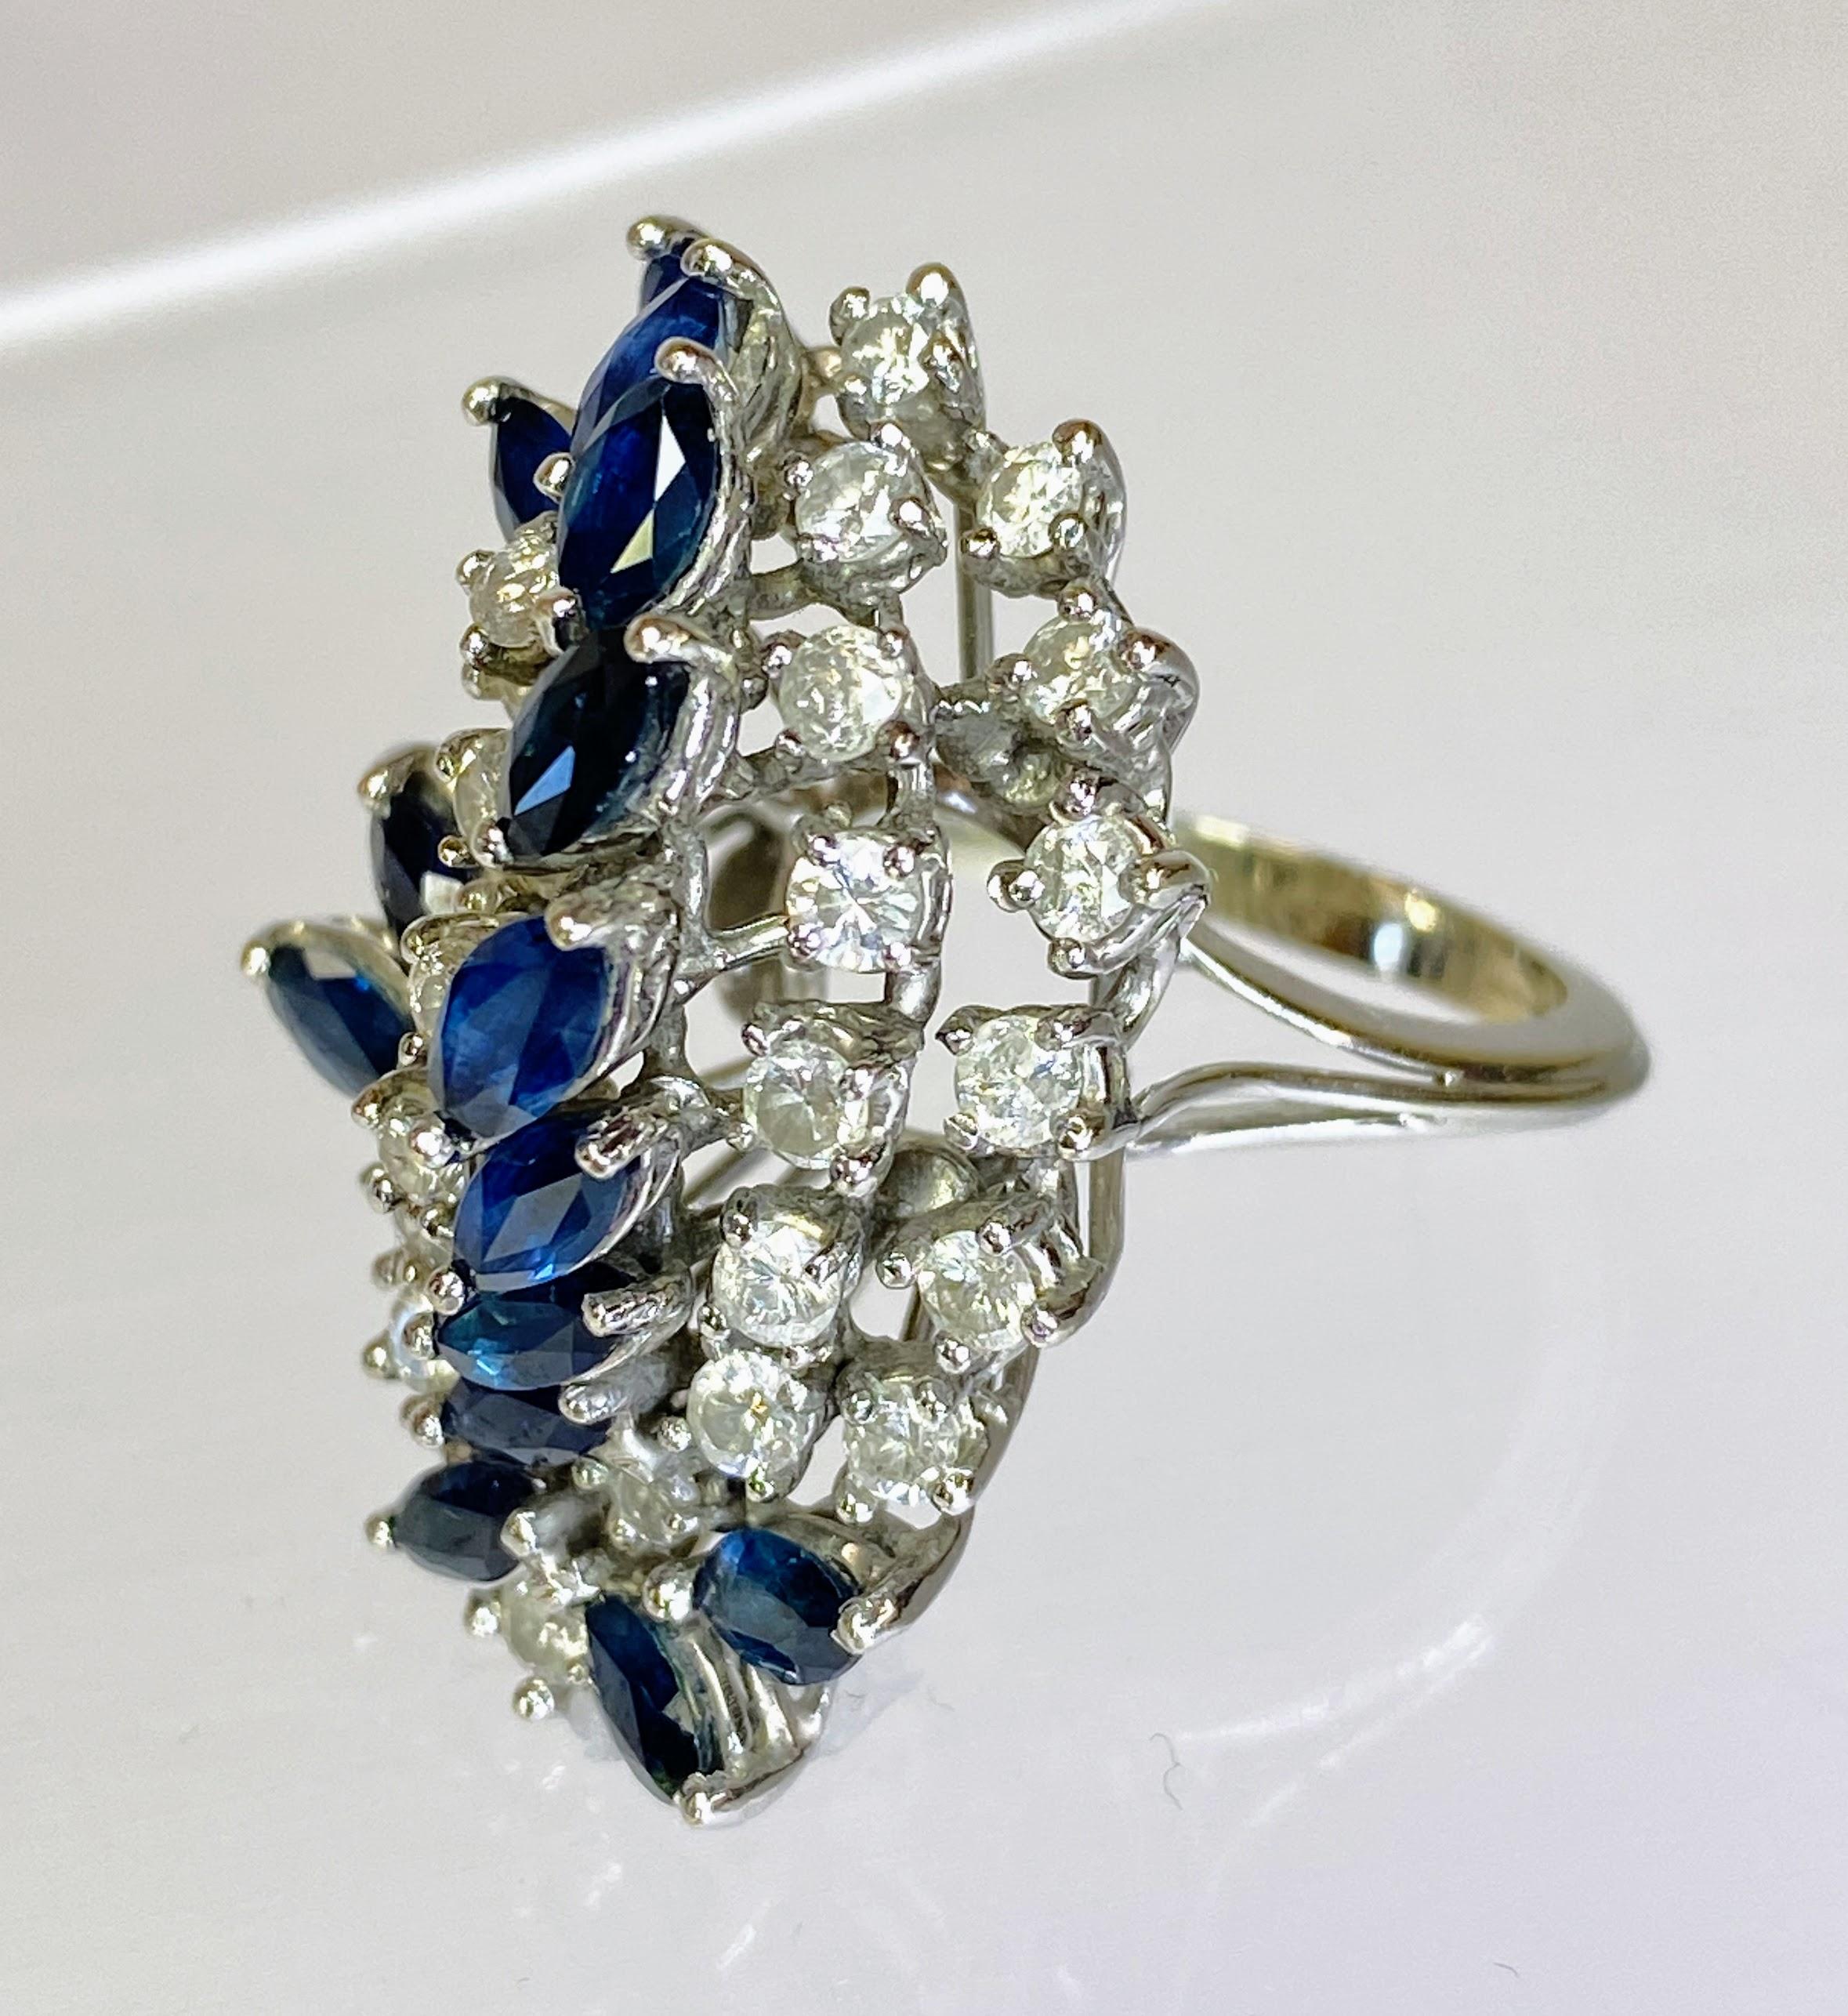 Modern 14K White Gold Diamond & Blue Sapphire 4.5 Carat Waterfall Cluster Ring Size 7.5 For Sale